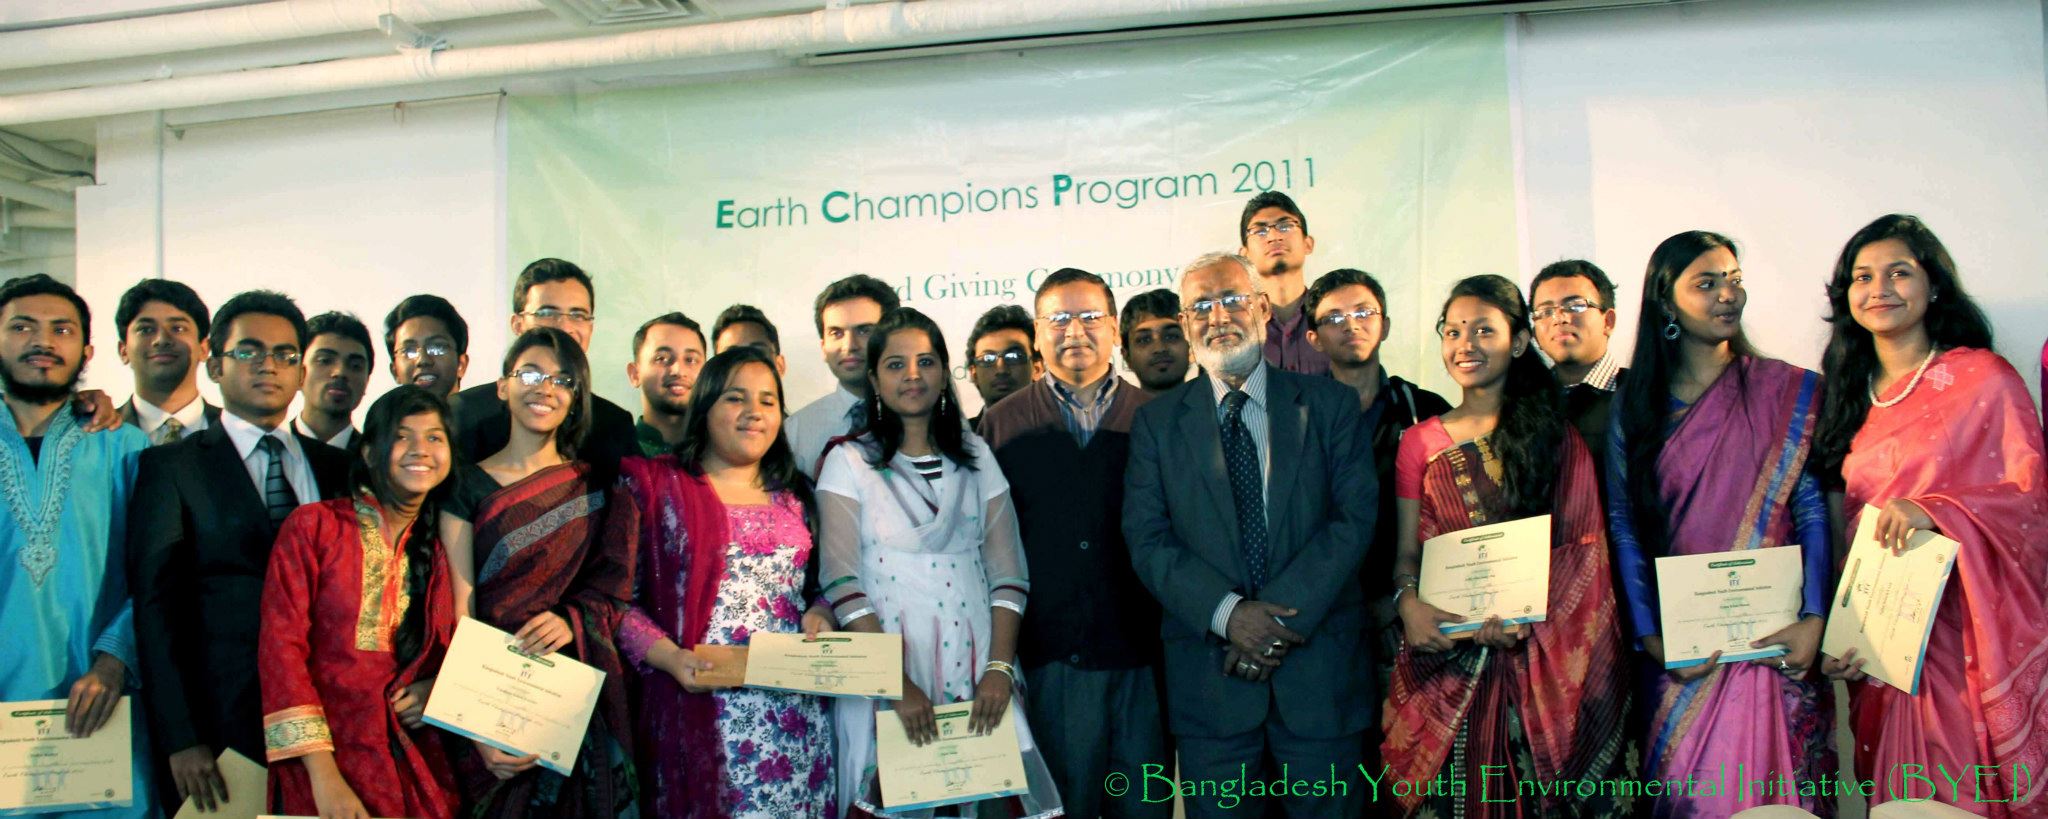 ECP-2011 Prize Giving Ceremony (2013)